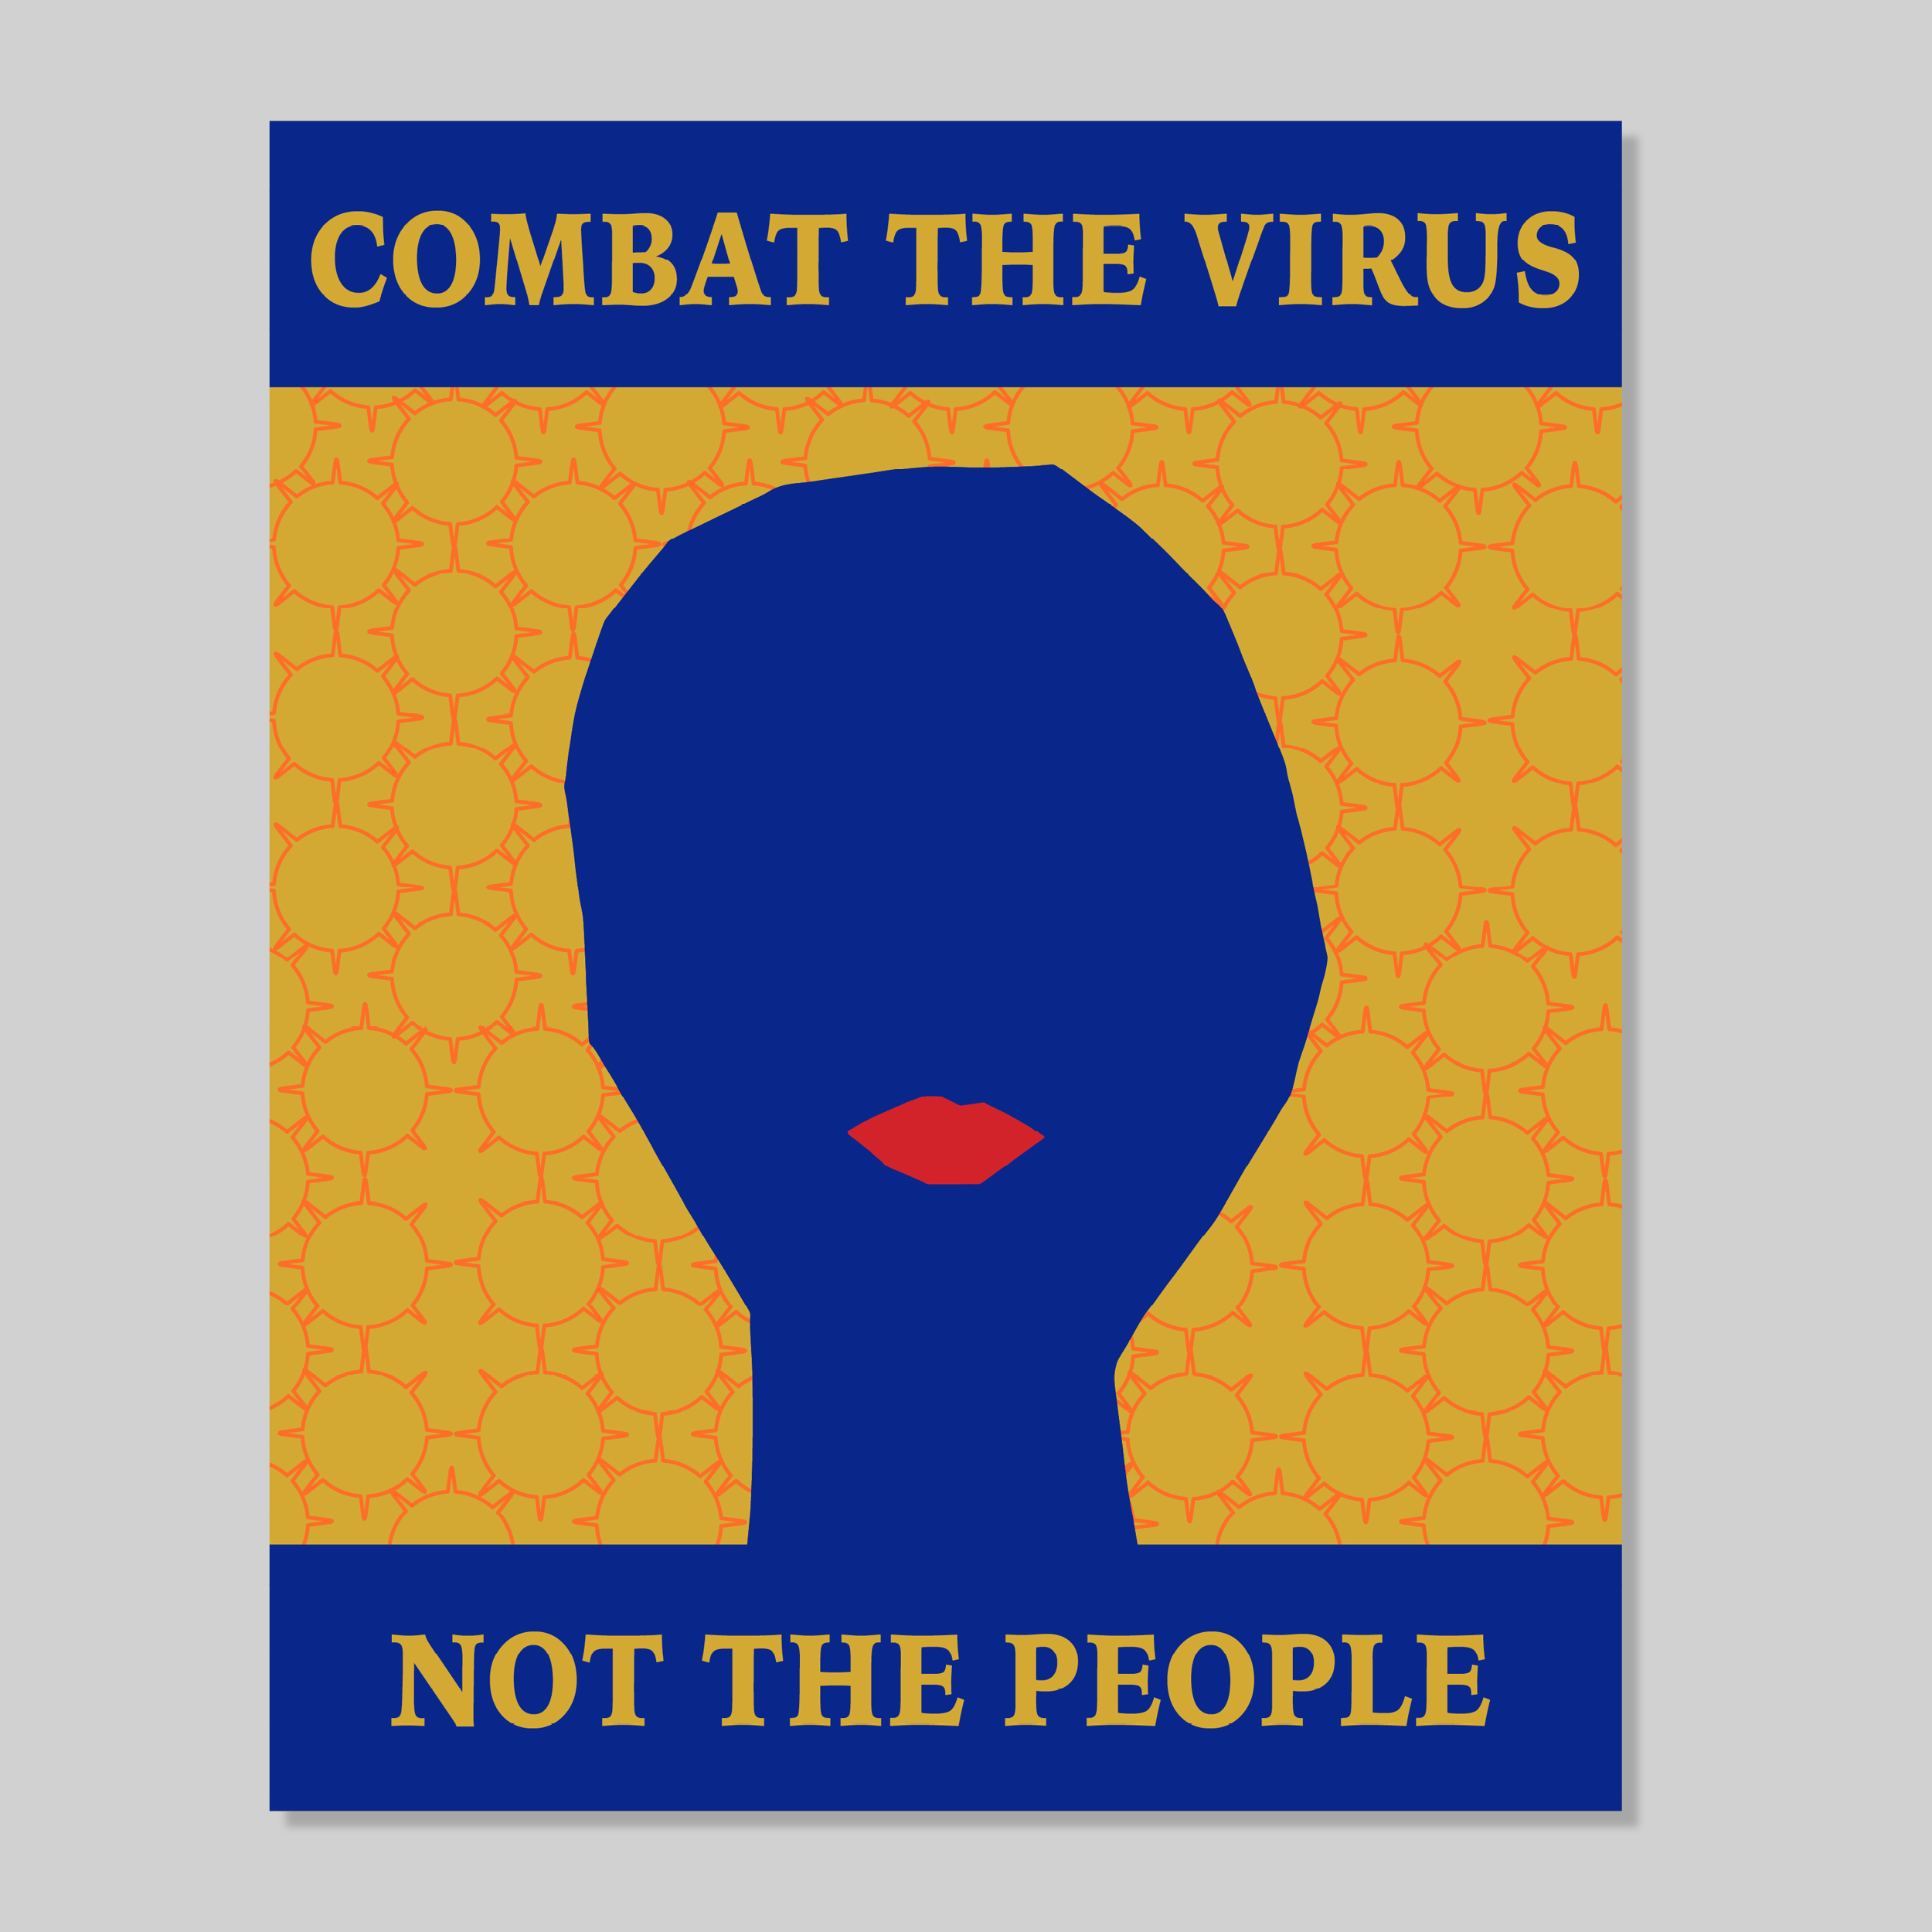 A poster with a silhouette of a blue face on a yellow background that says combat the virus not the people.